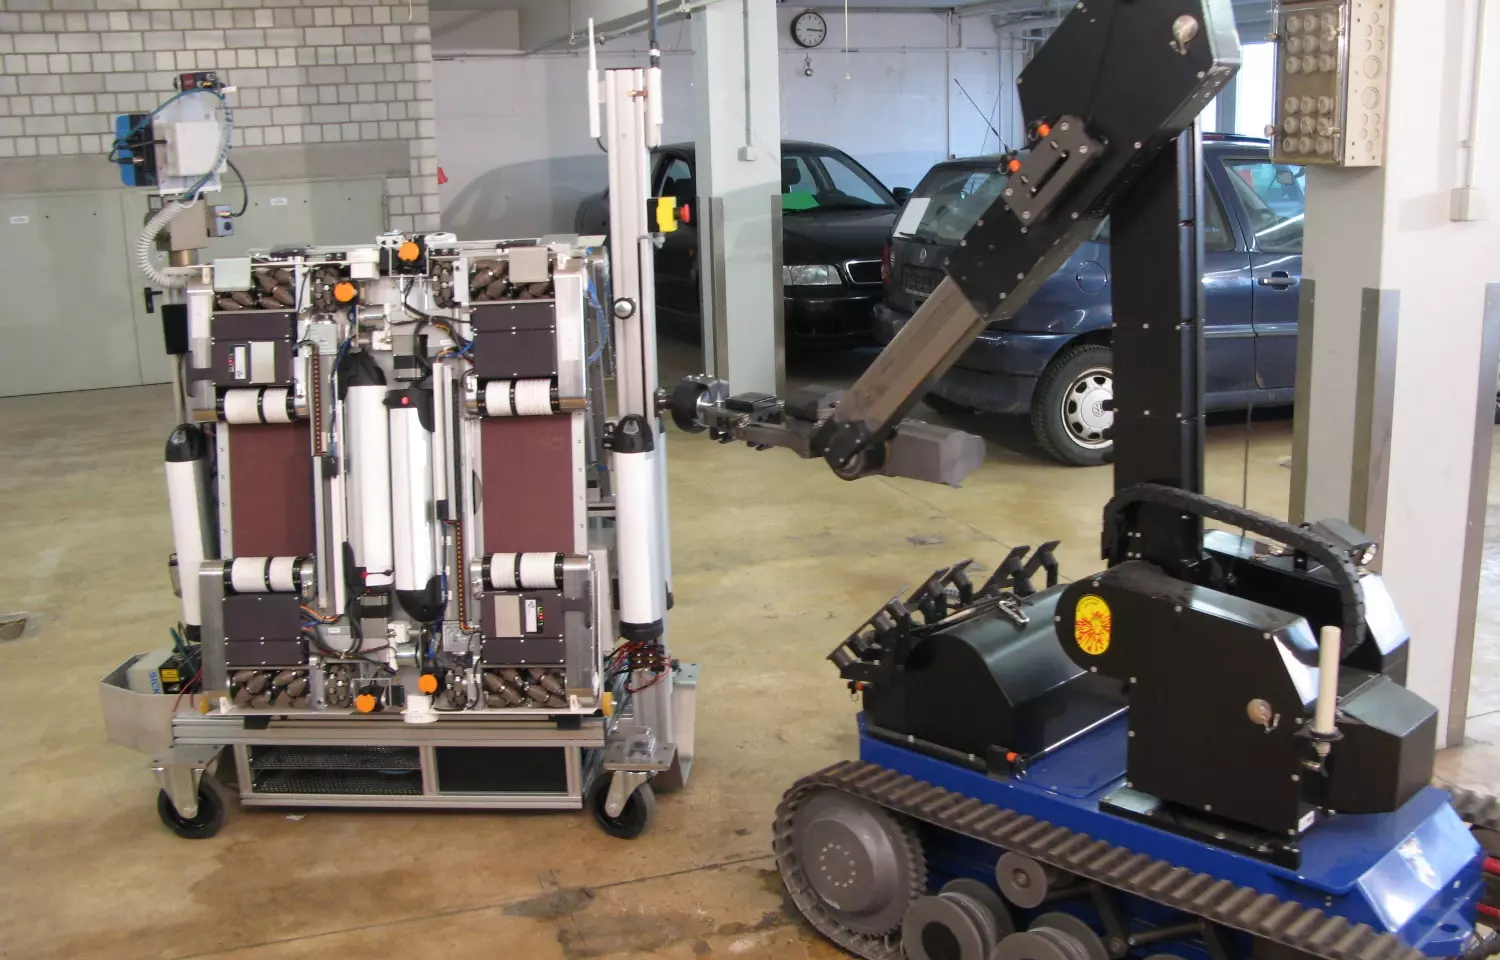 AVERT - Robots increase safety for bomb squads